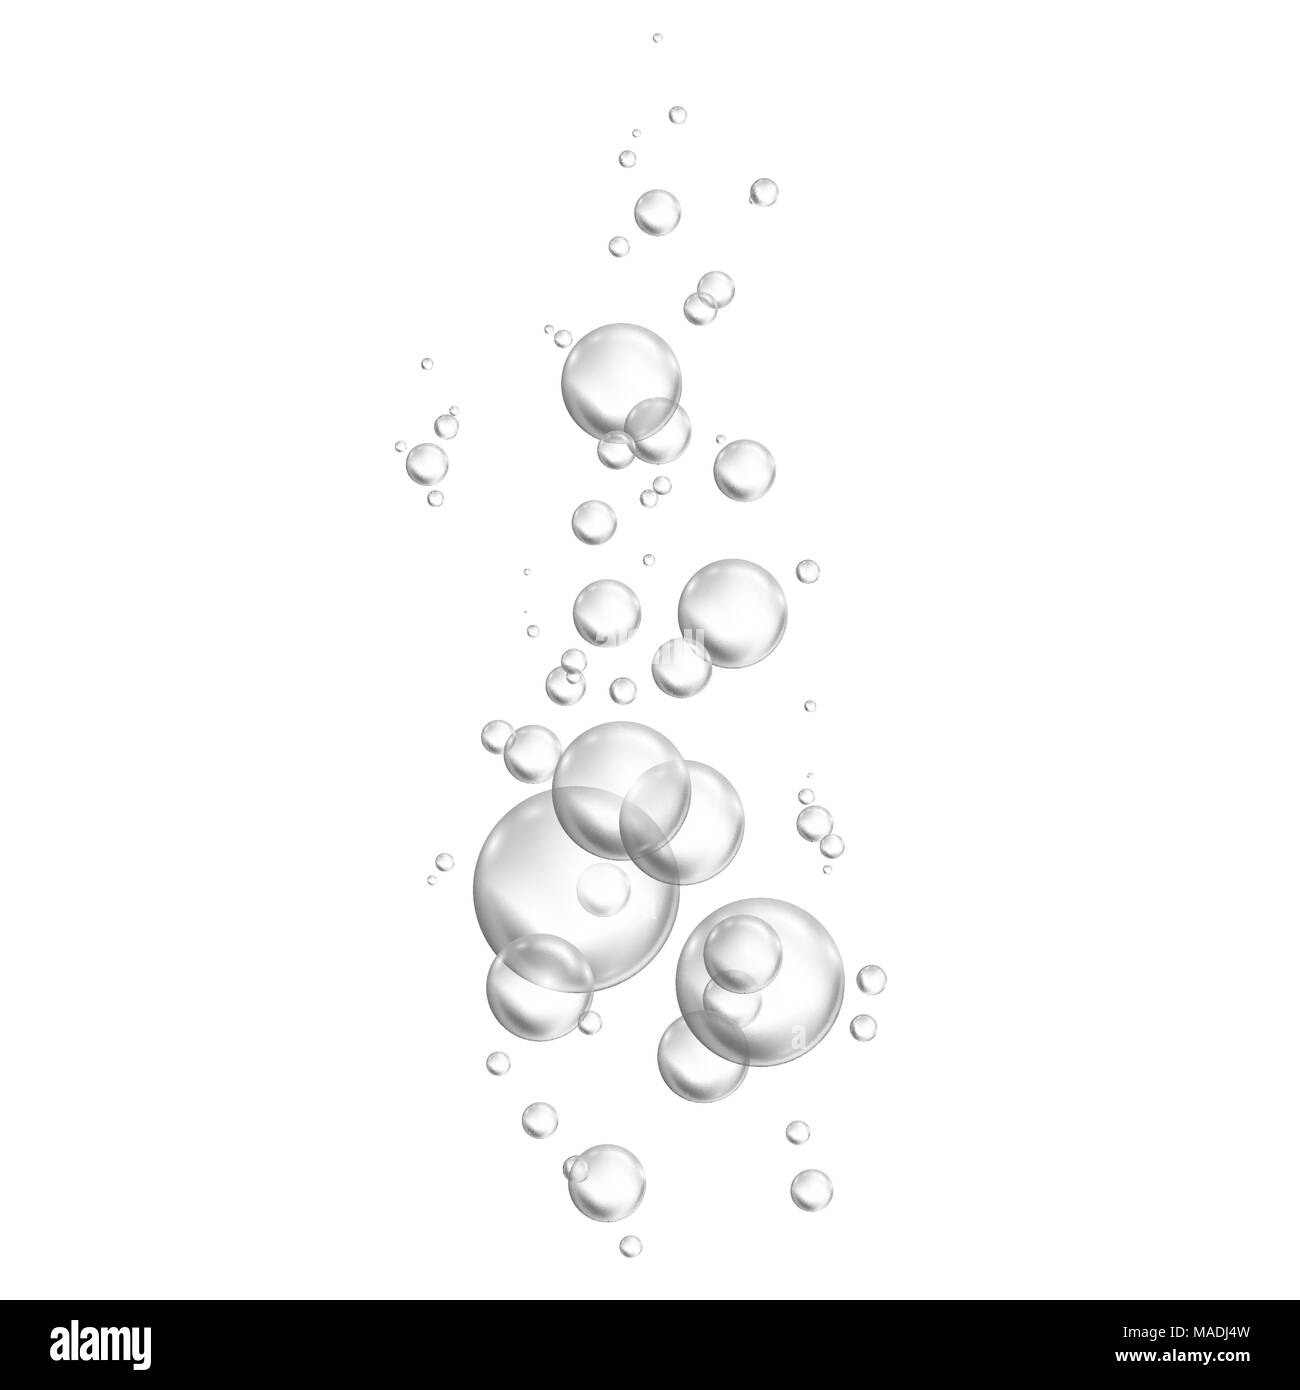 Abstract Bubbles. White background with bubbles. Vector illustration isolated on white Stock Vector